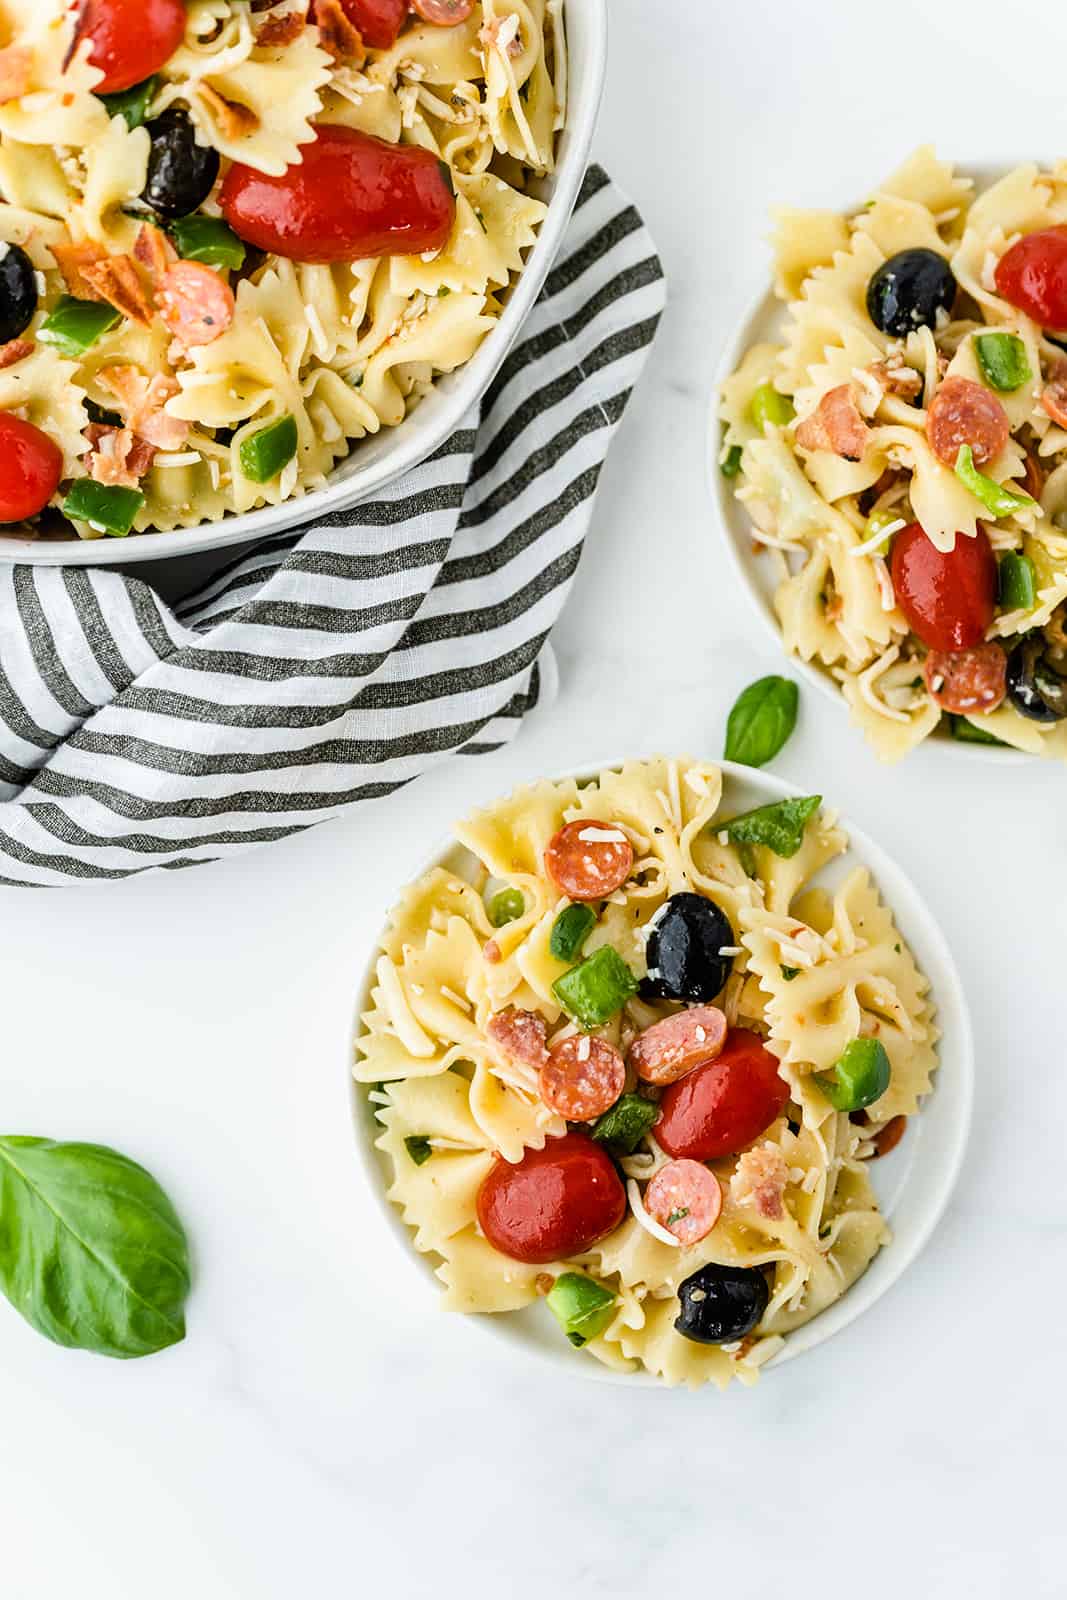 Pizza Pasta Salad - A perfect summer dish with all the best pizza flavors! Salty pepperoni and olives are coated in tangy Italian dressing and covered in cheese.